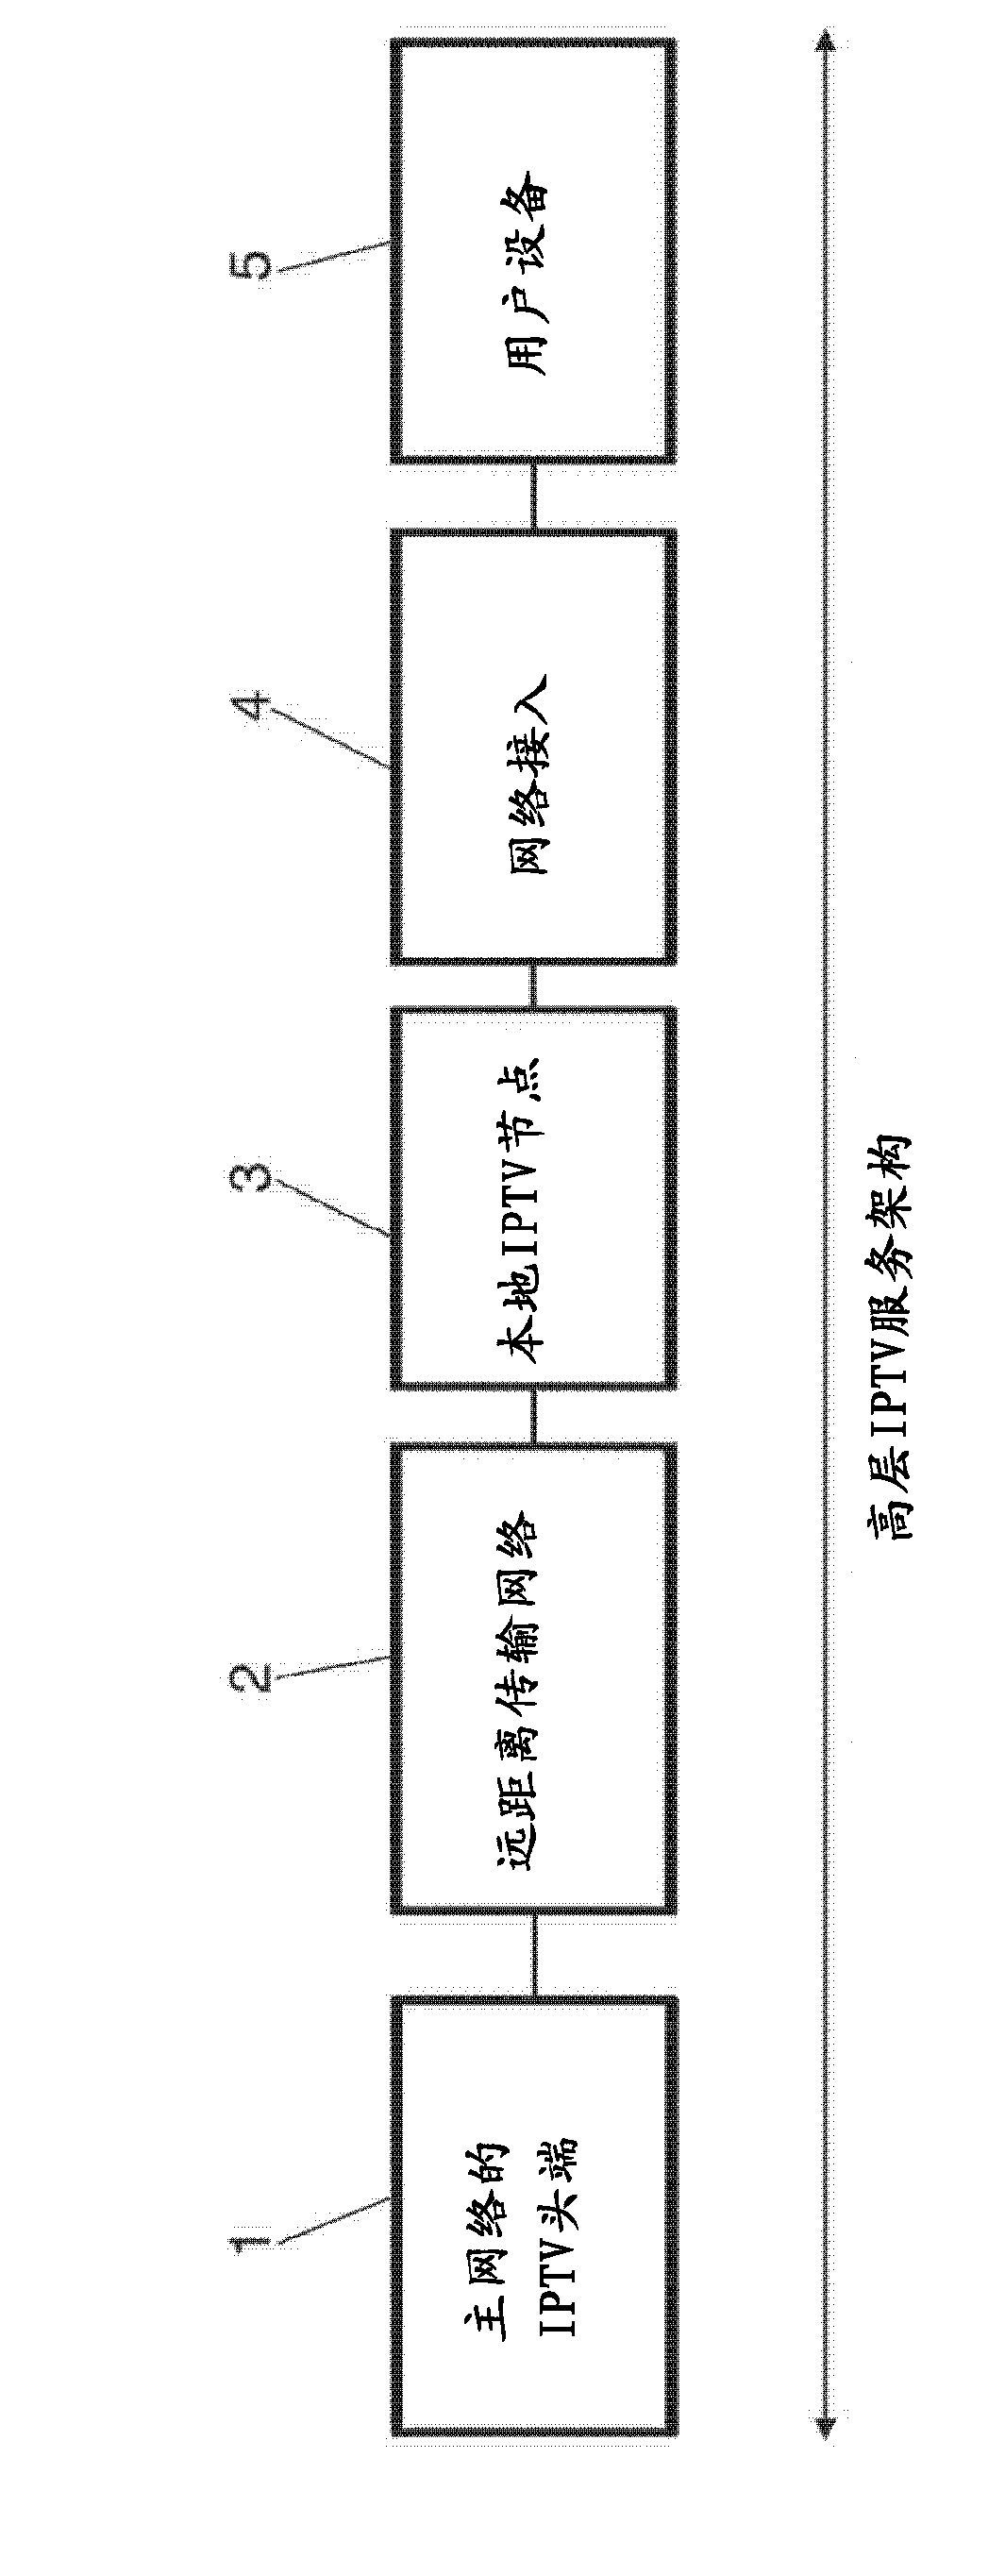 System and method for distributing digital signals over long-distance switched optical transport networks